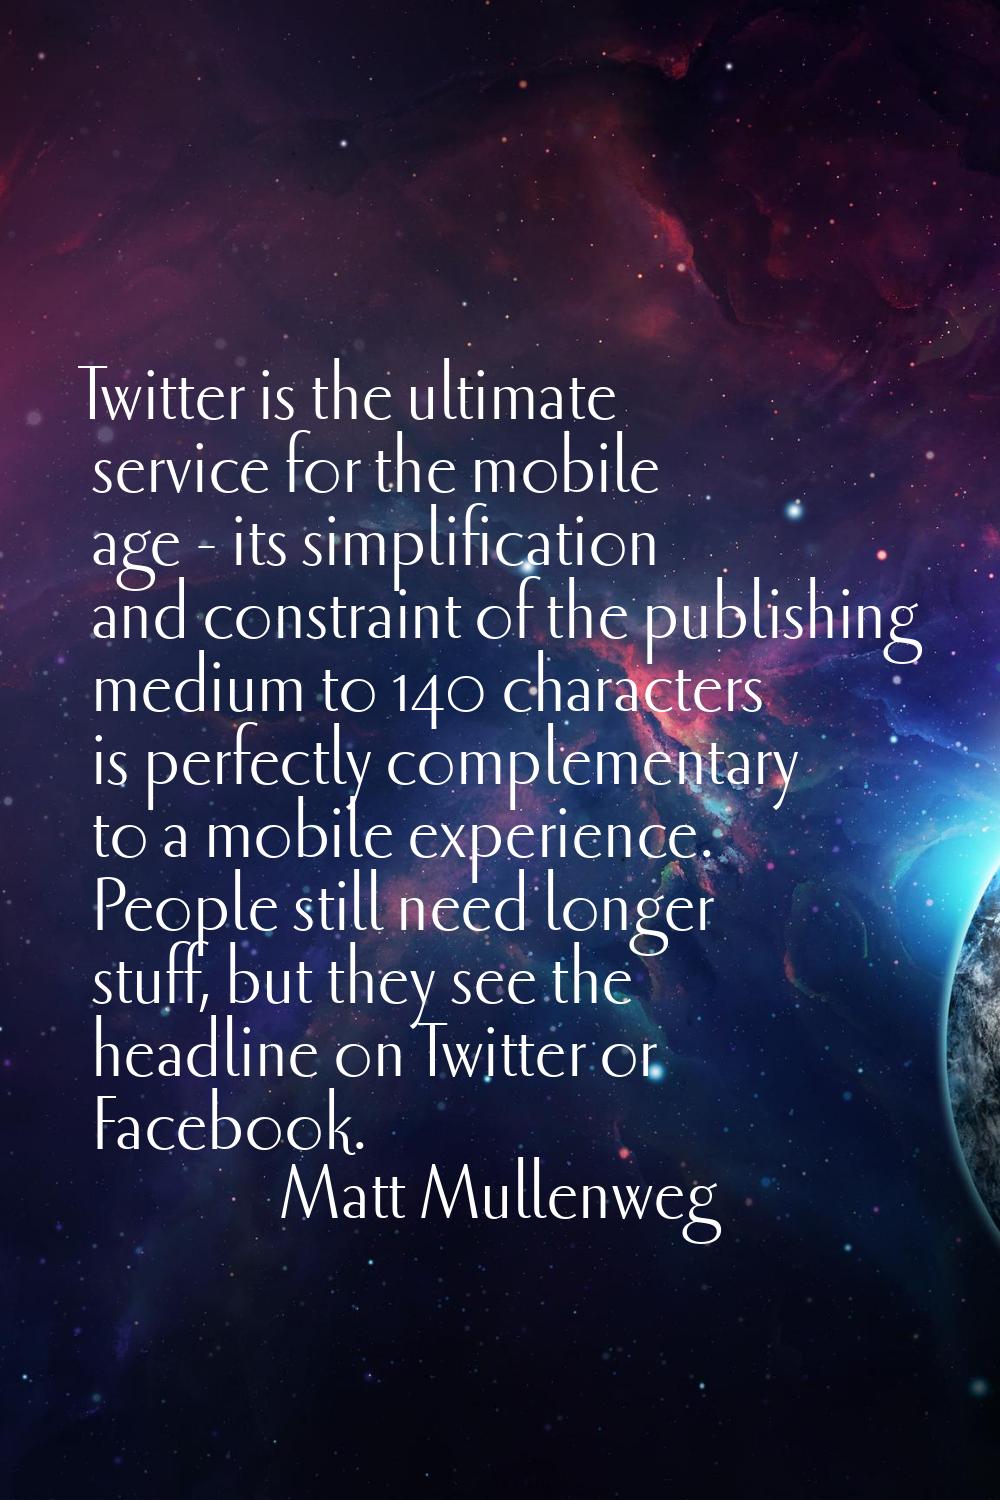 Twitter is the ultimate service for the mobile age - its simplification and constraint of the publi